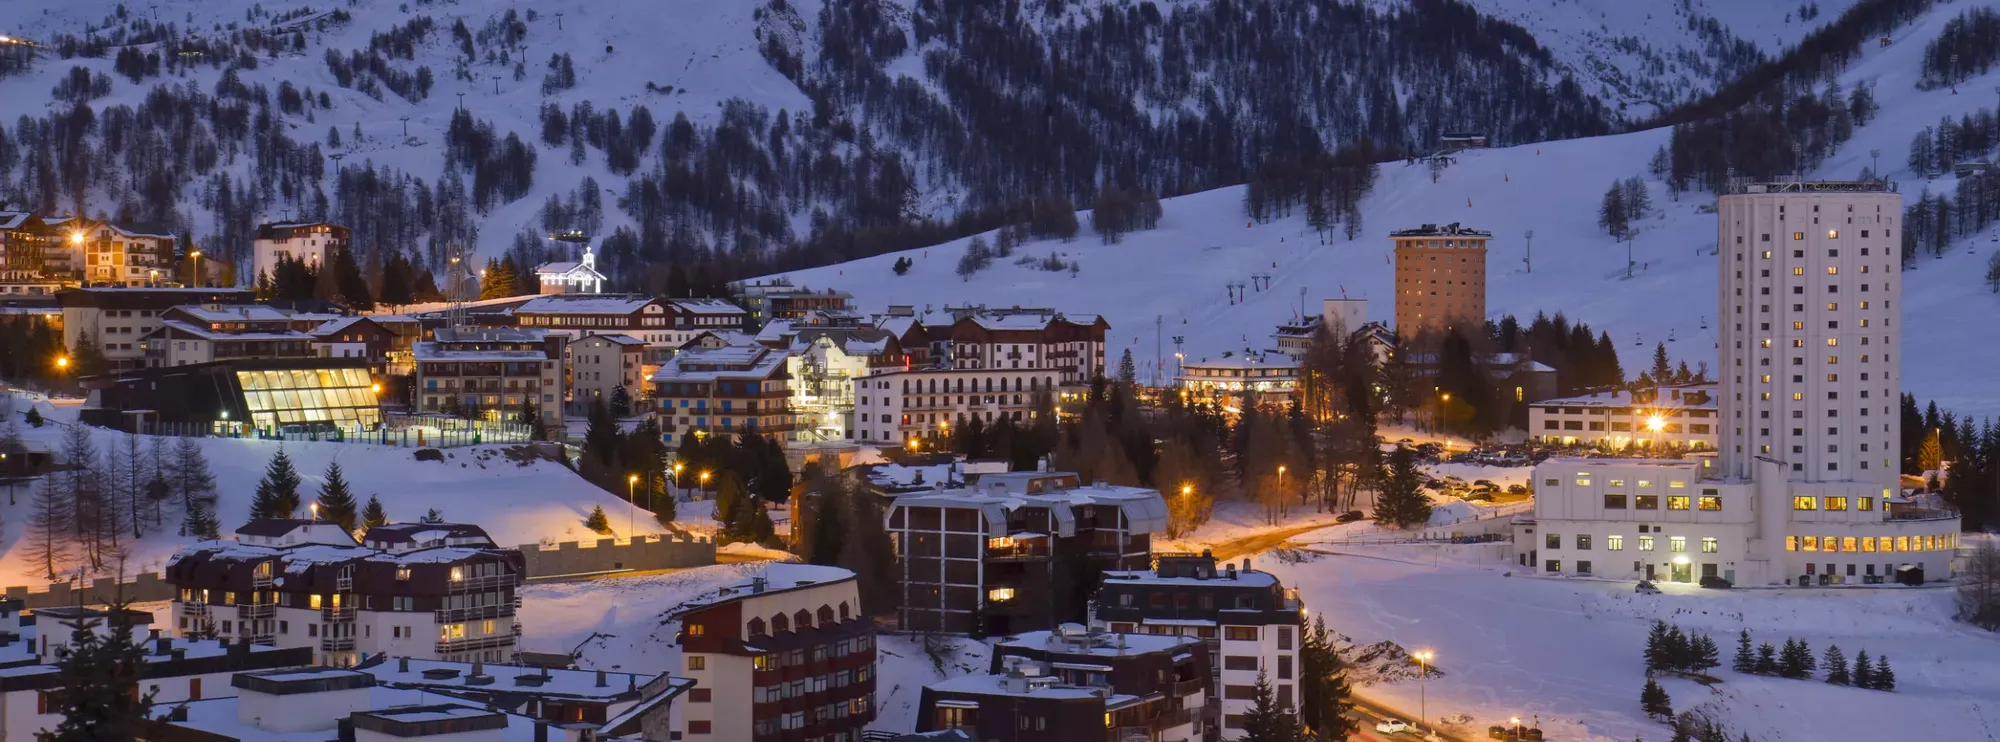 Sestriere | Aosta Valley Region, Italy - Rated 4.1